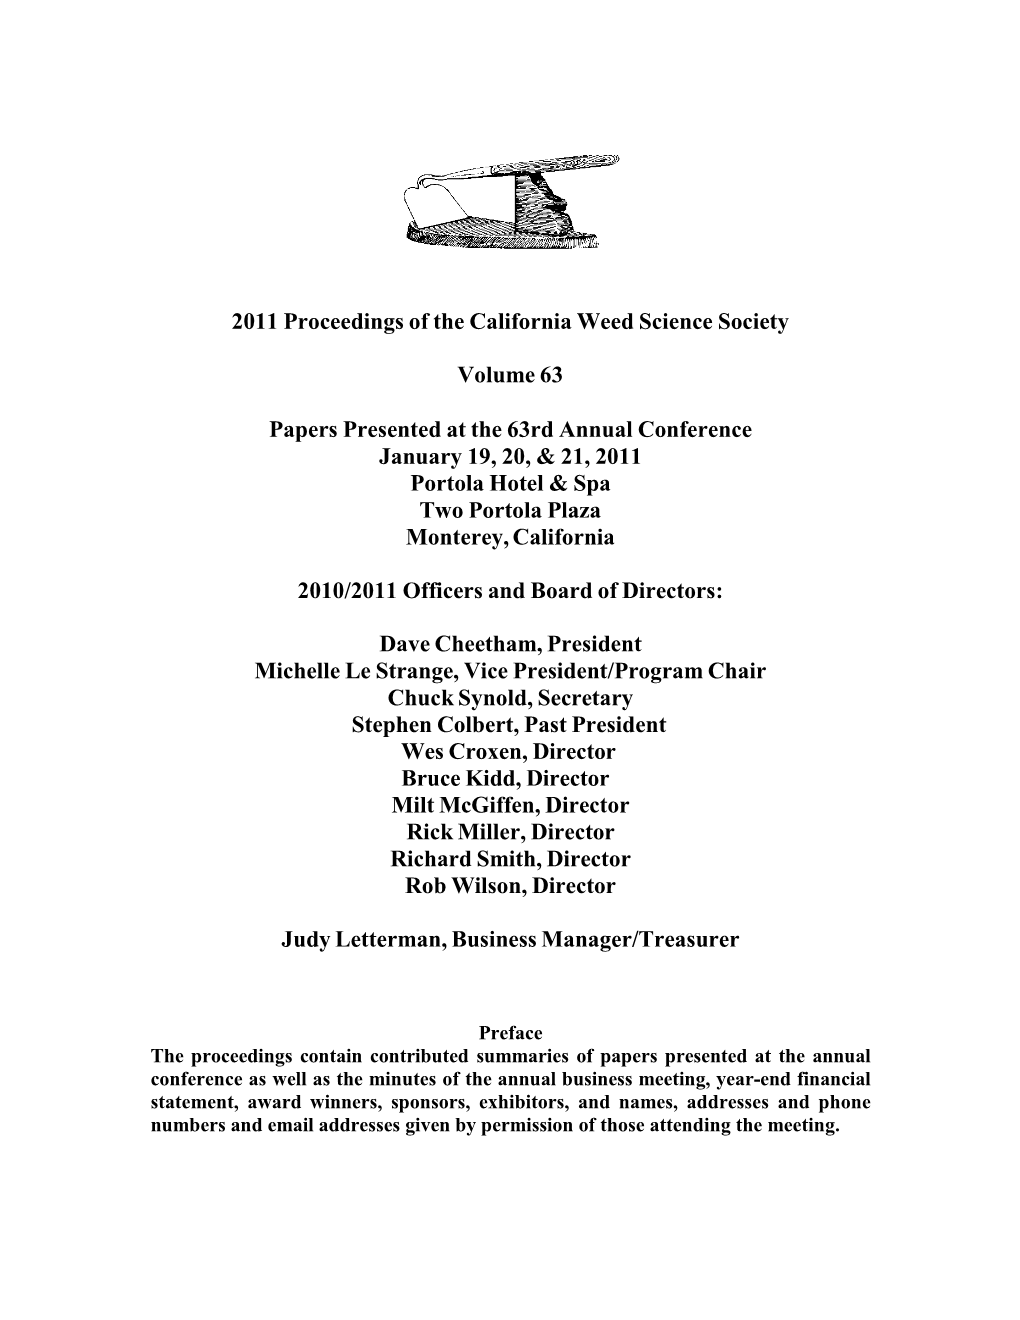 2011 Proceedings of the California Weed Science Society Volume 63